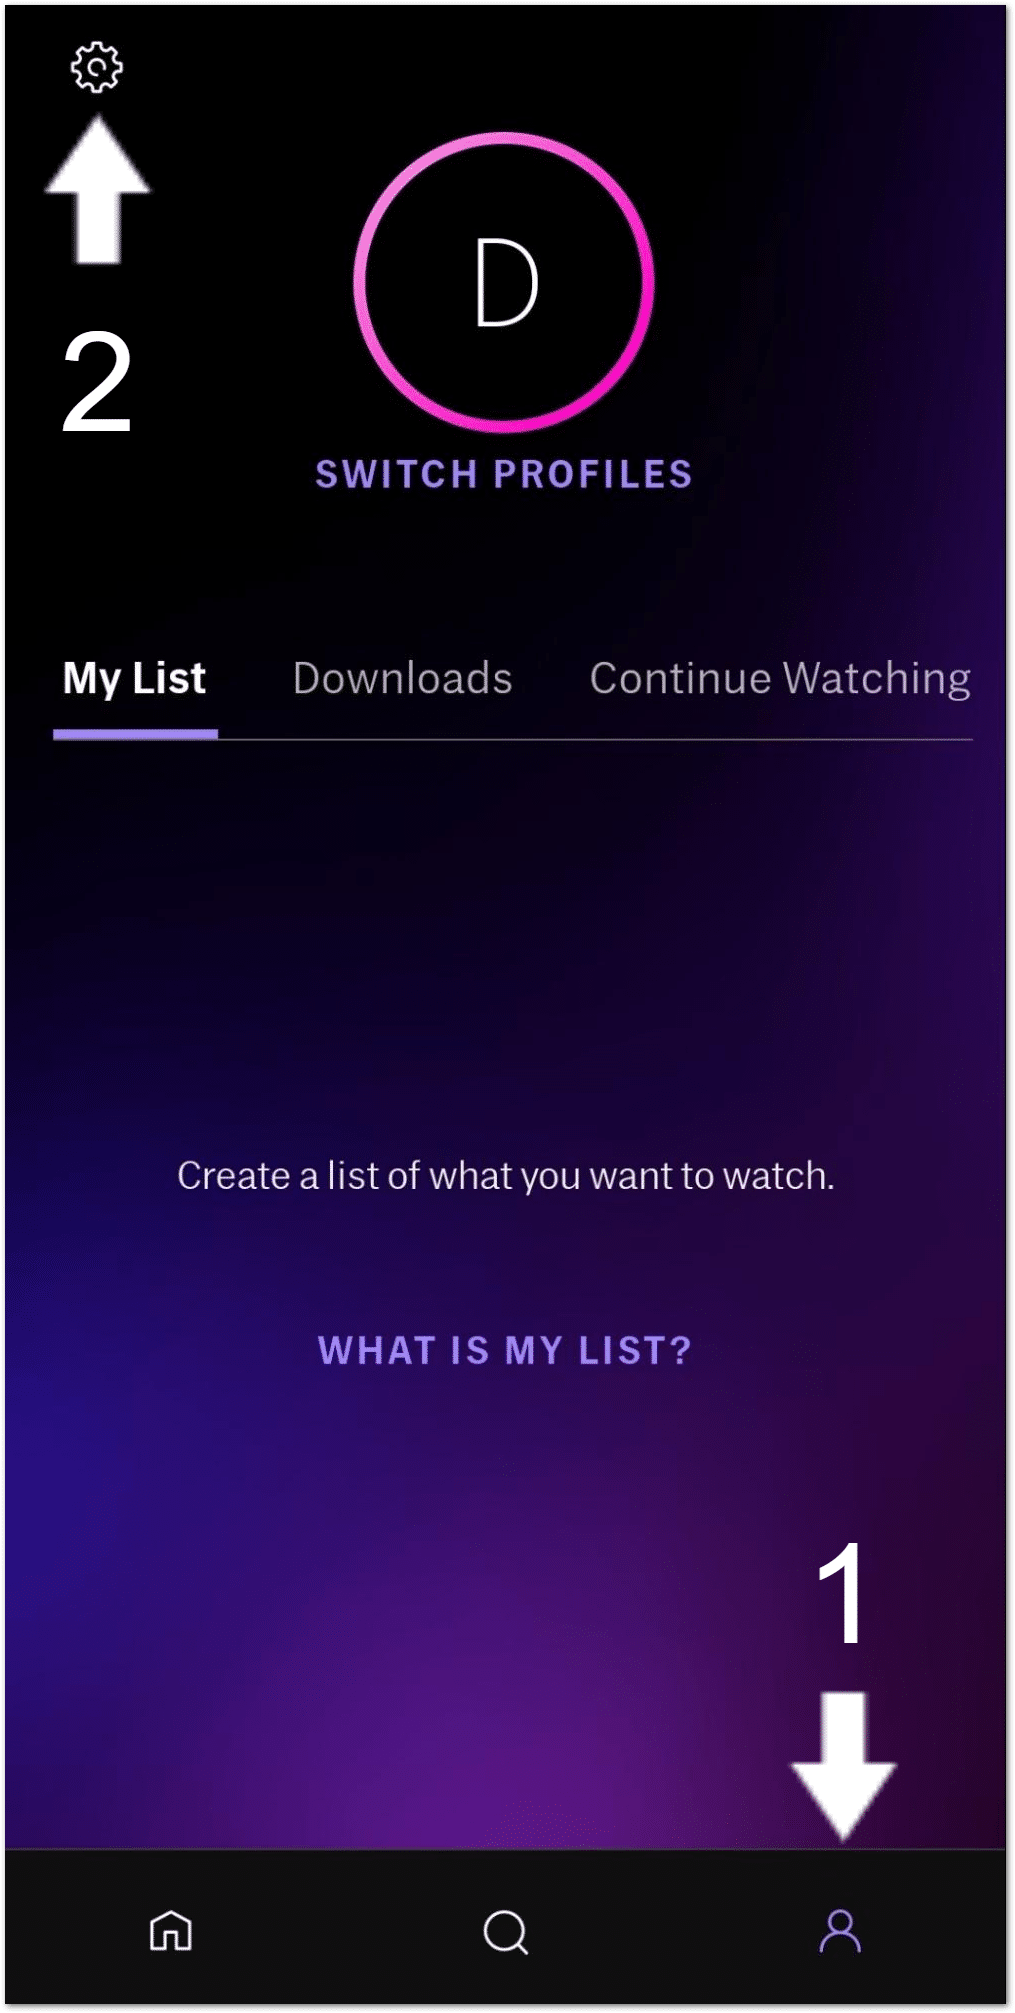 access settings menu on HBO Max mobile app to sign out and to fix HBO Max black screen, keeps freezing, crashing, or lagging